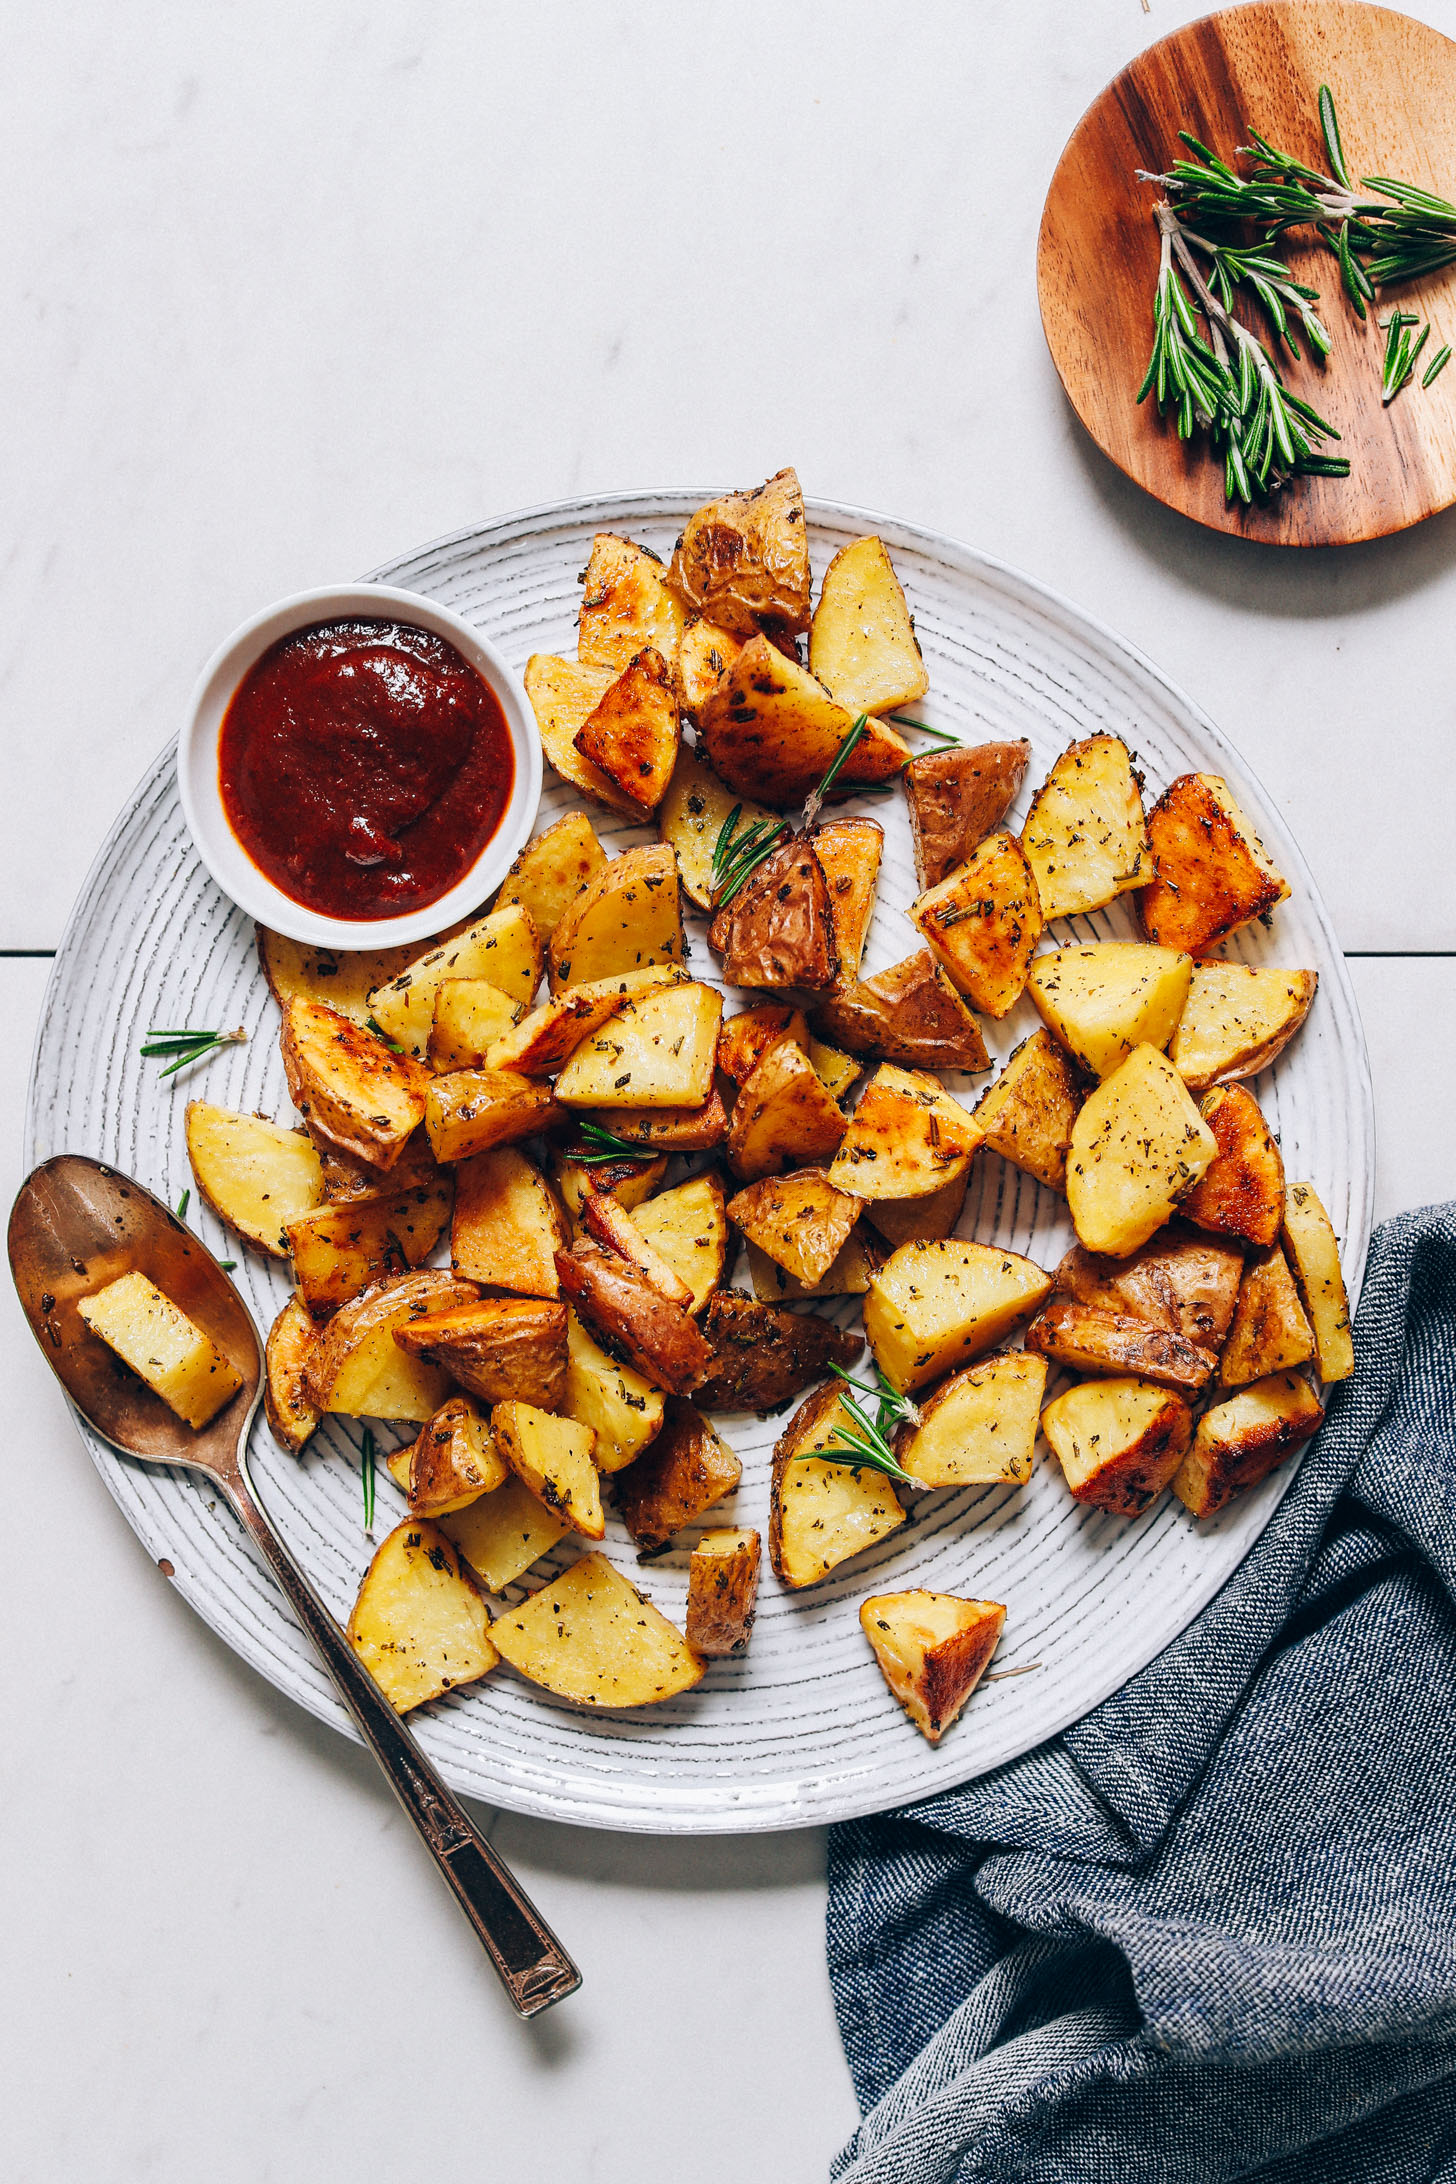 Plate of Perfectly Roasted Potatoes with ketchup for serving